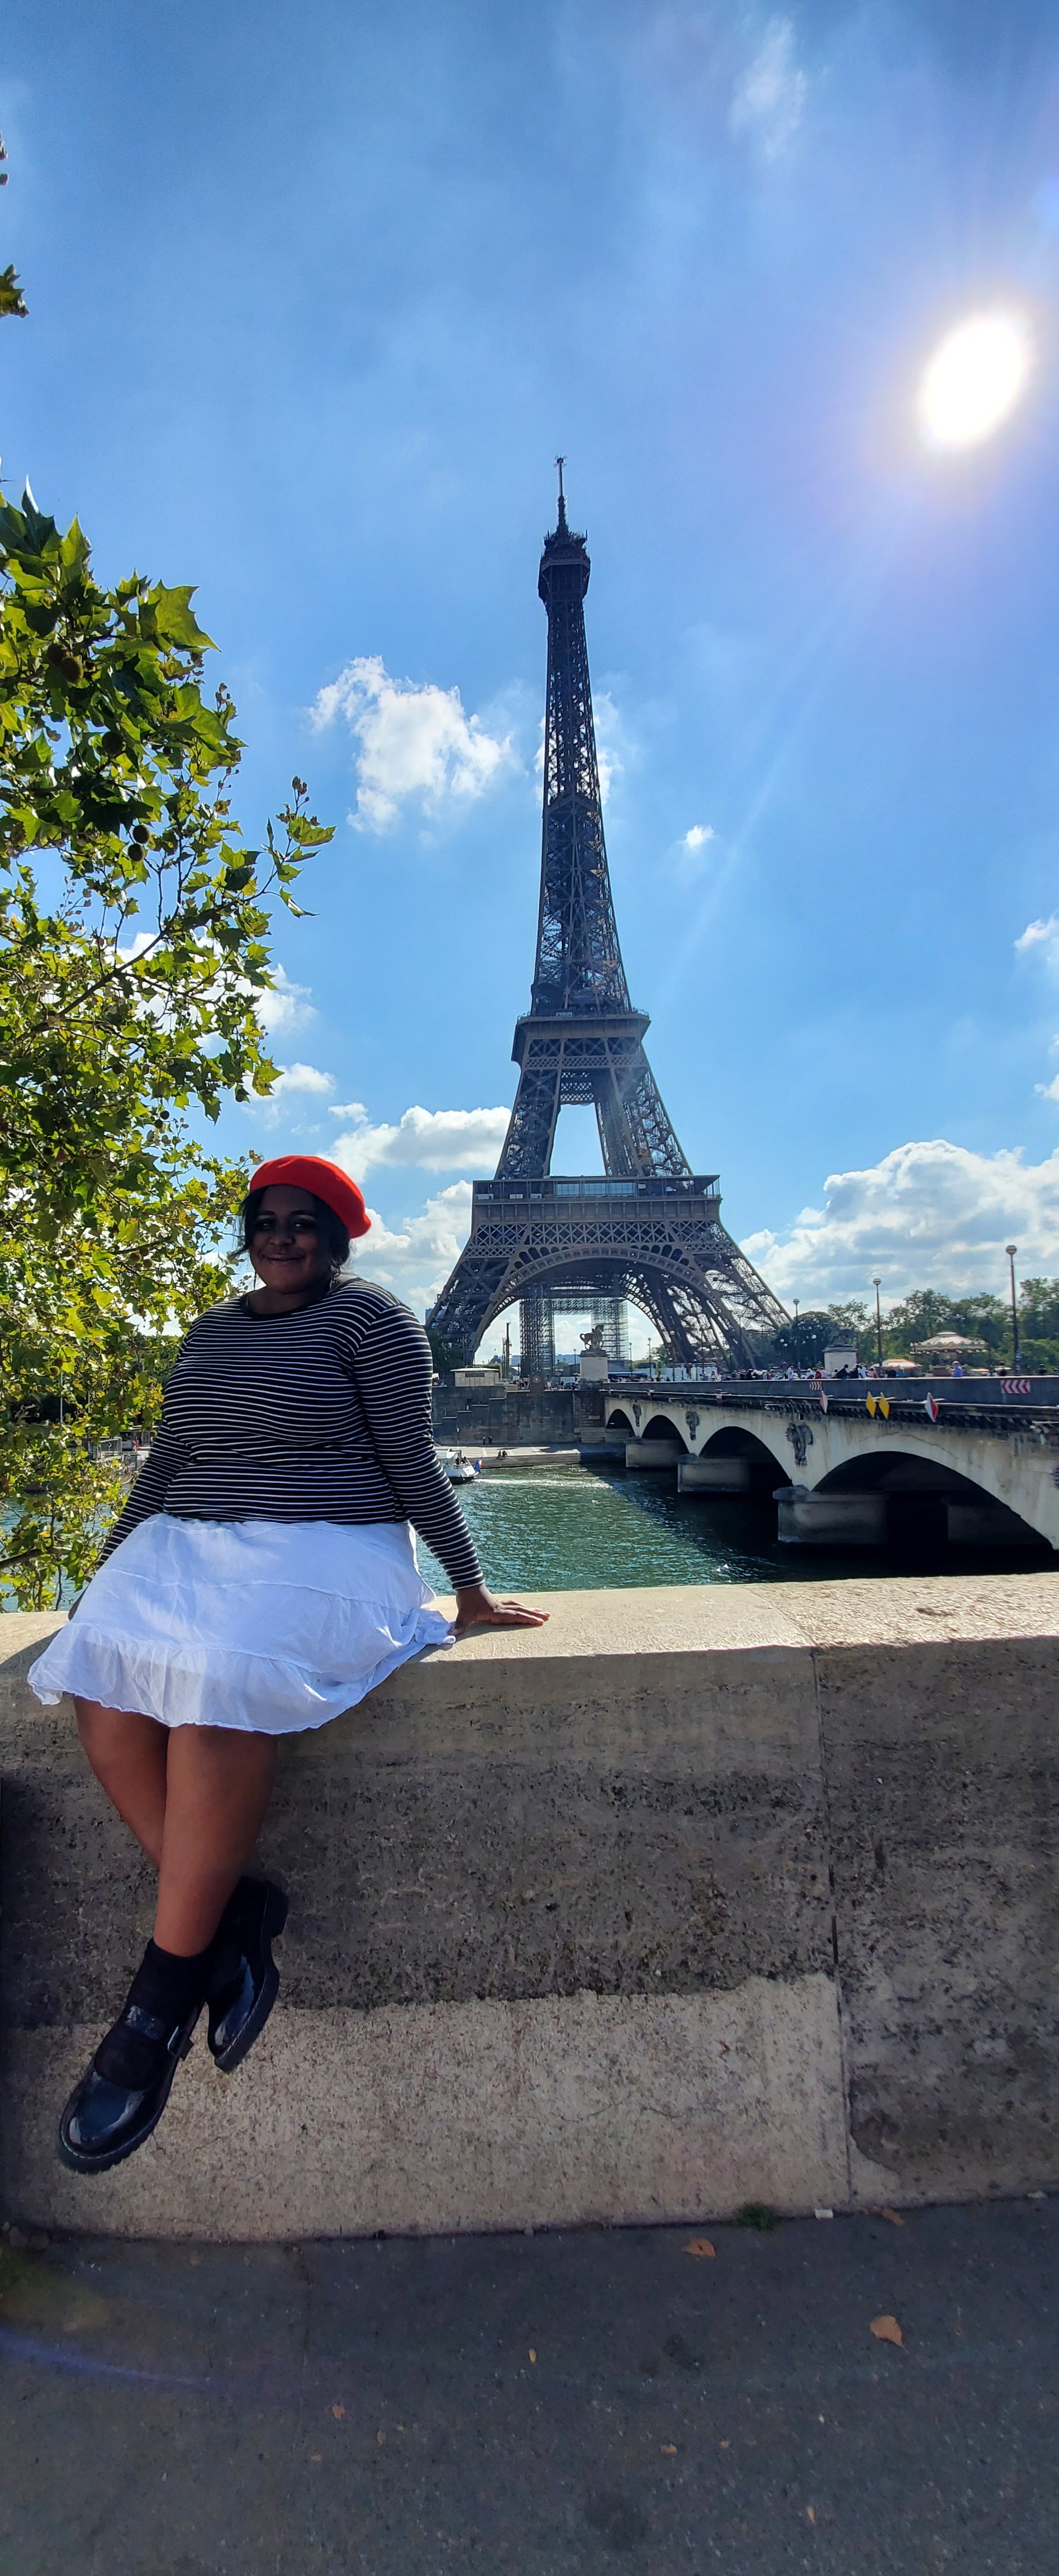 This photo was taken in Paris, France! It was my first trip outside of Italy!